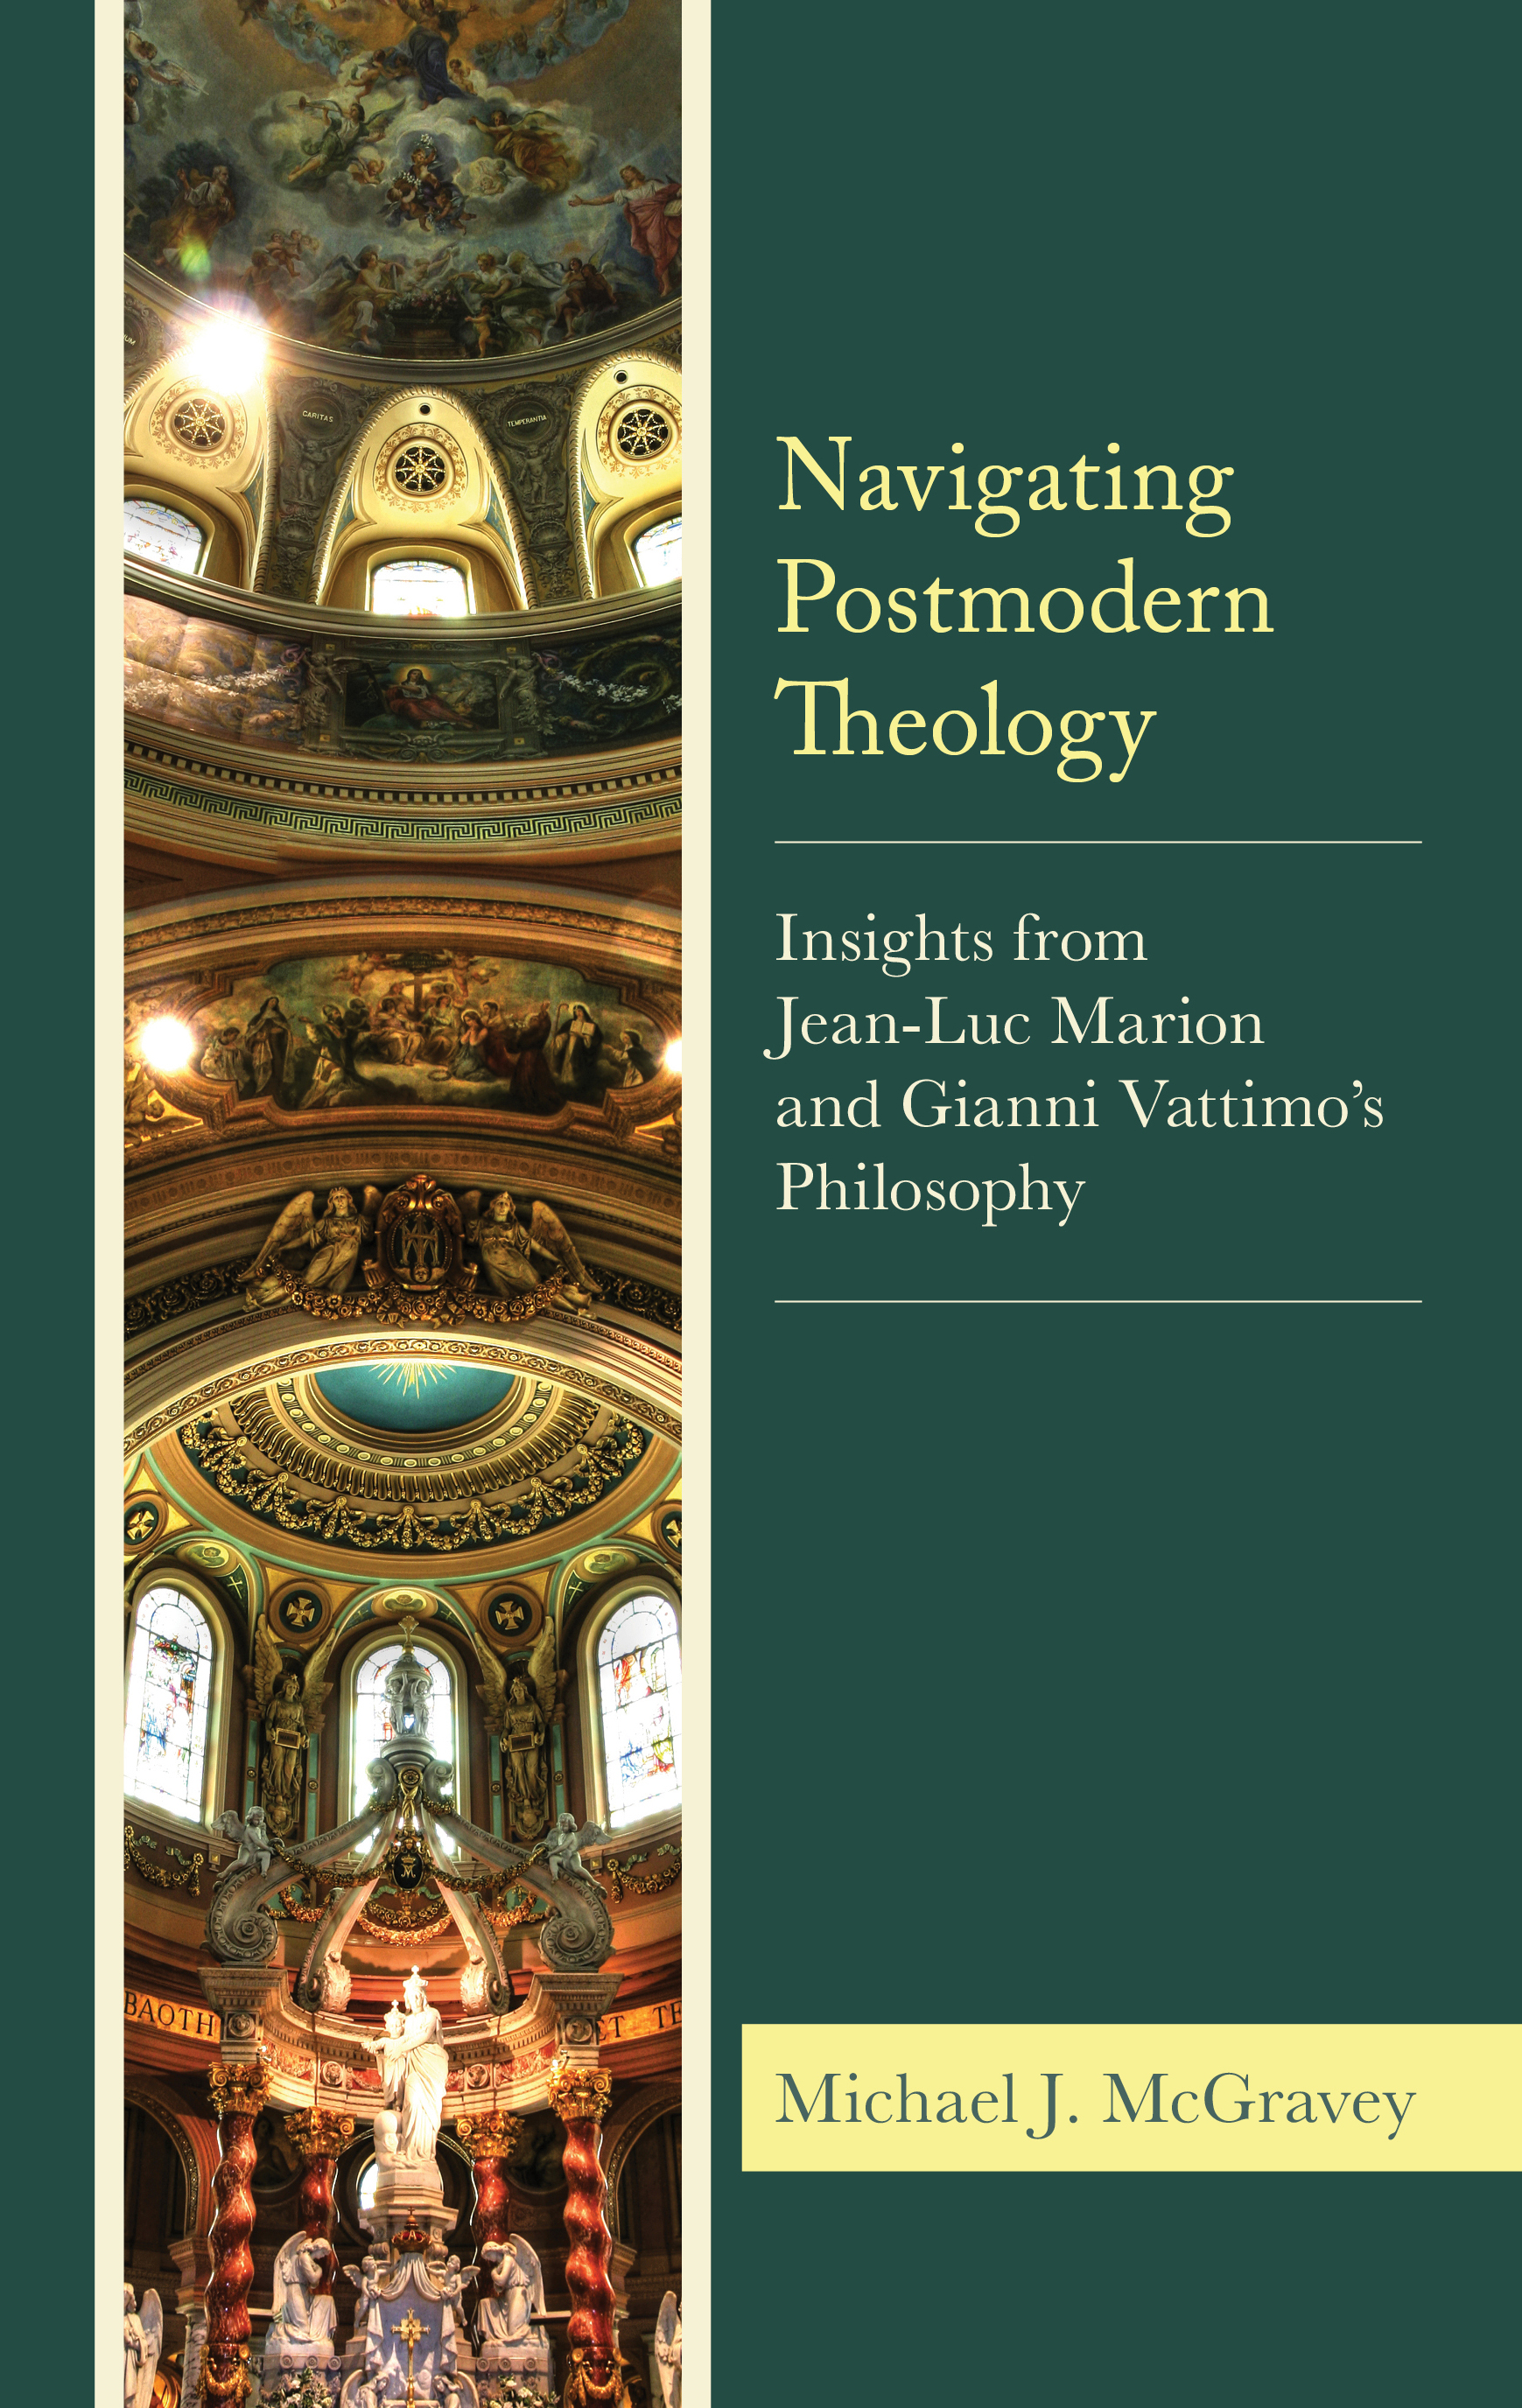 Navigating Postmodern Theology: Insights from Jean-Luc Marion and Gianni Vattimo’s Philosophy